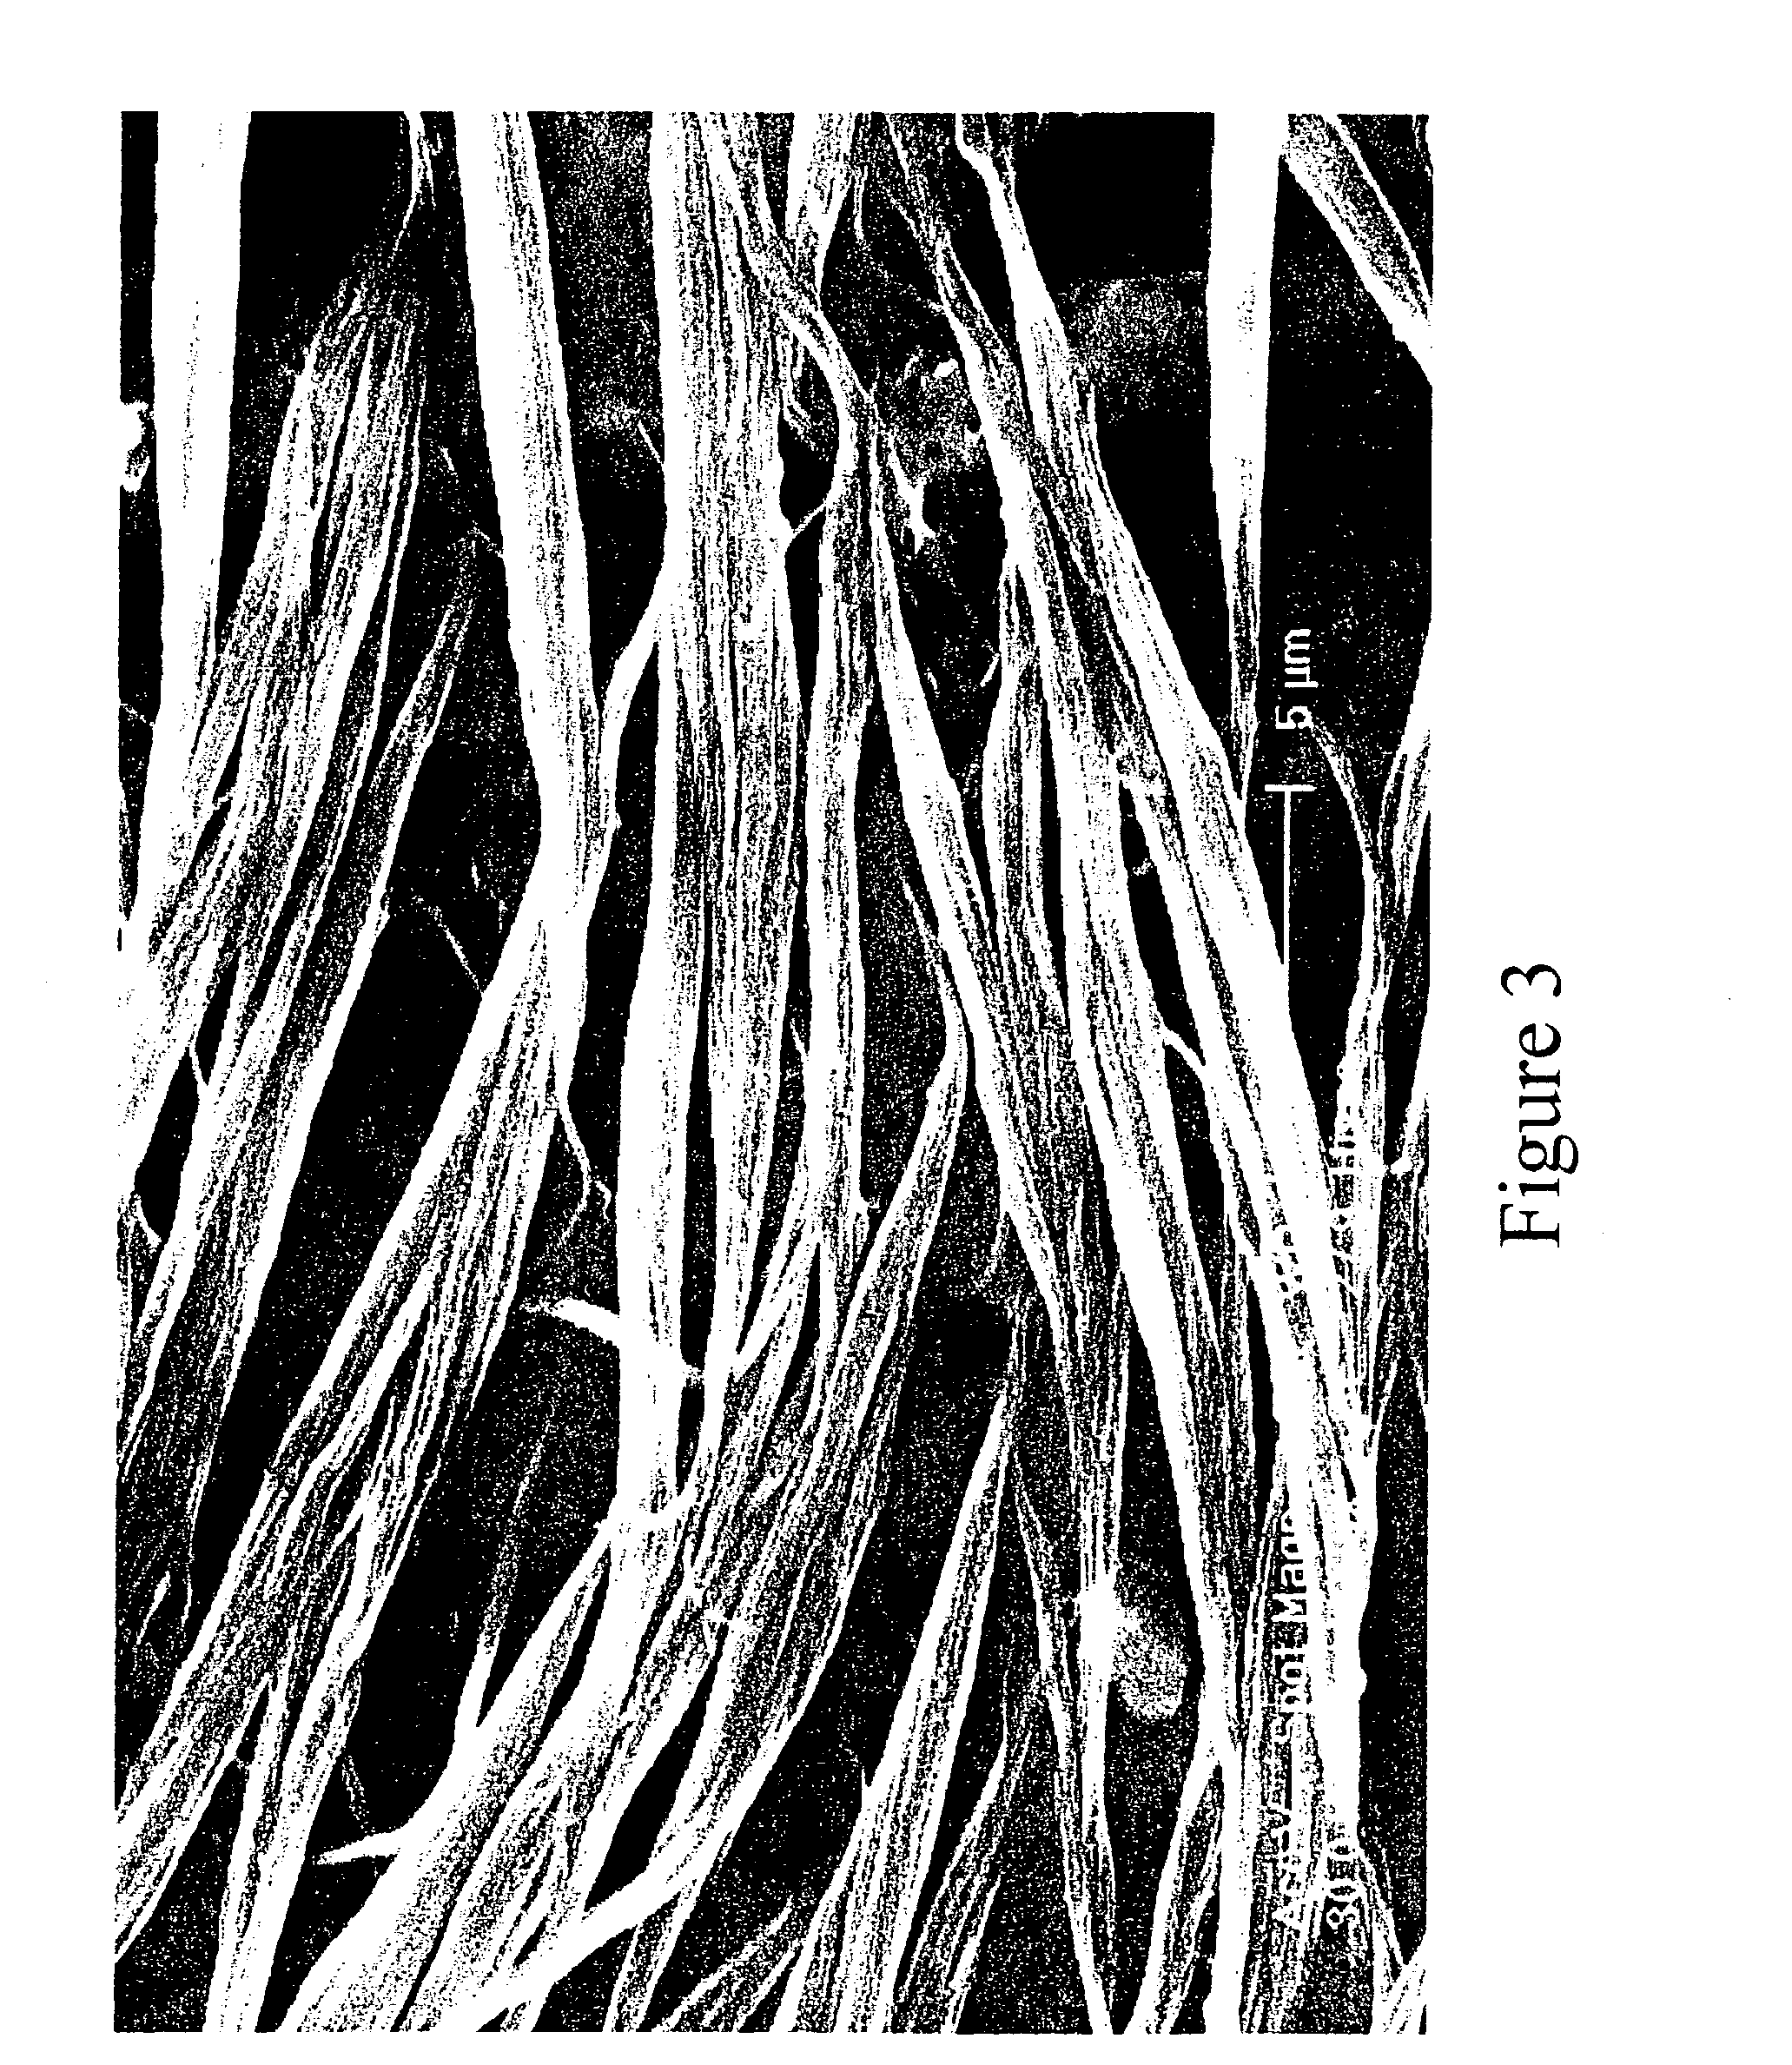 Fibers of aligned single-wall carbon nanotubes and process for making the same